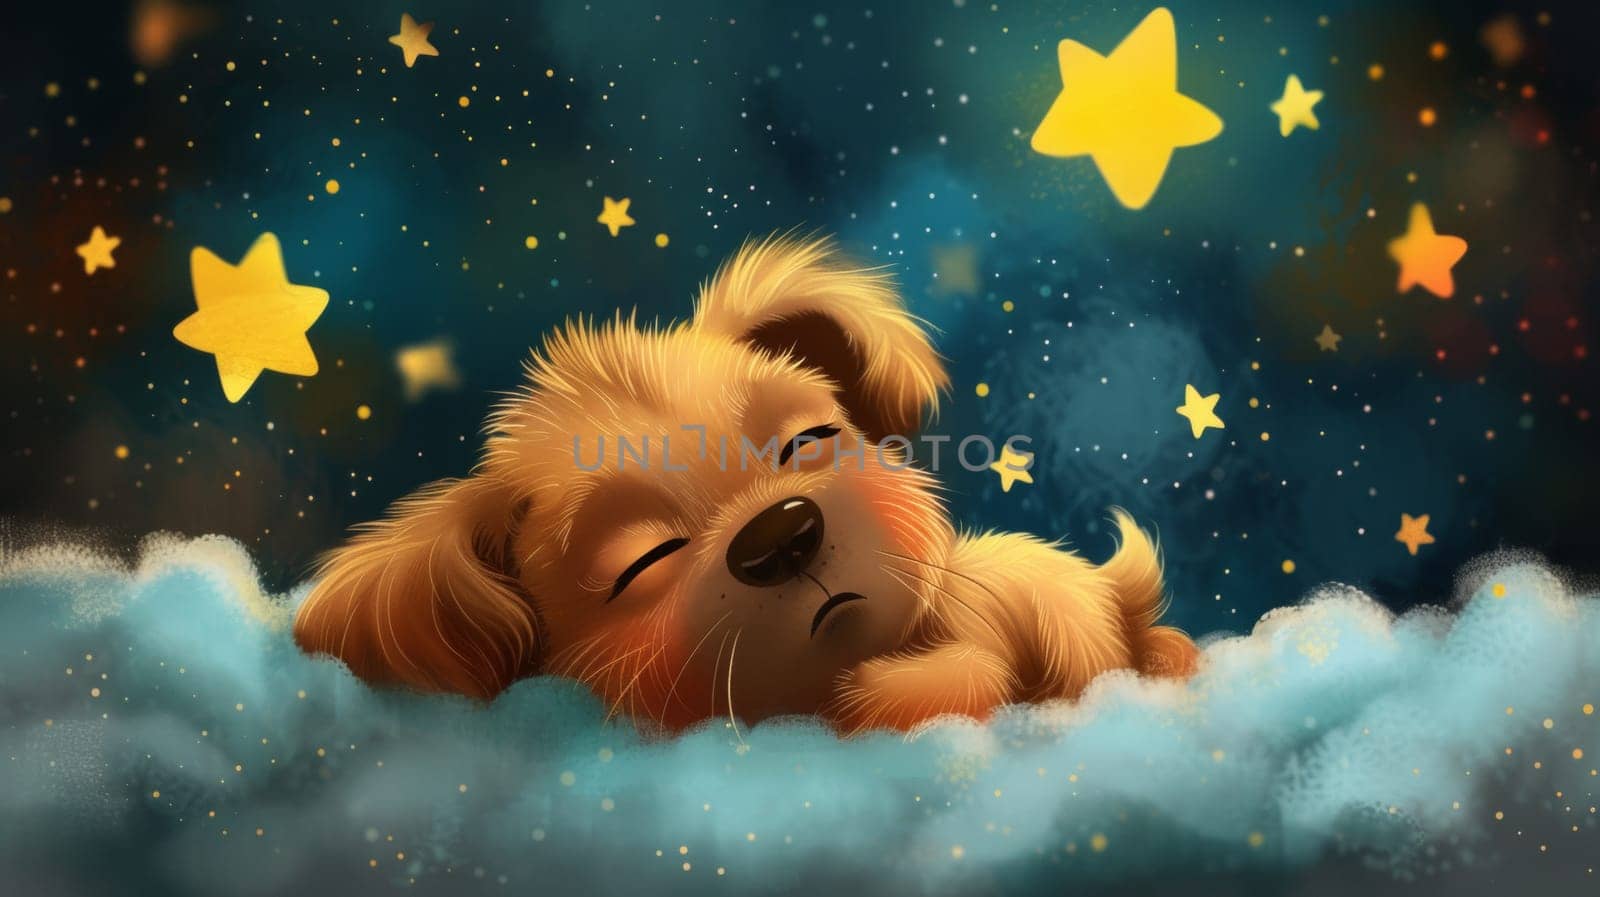 A cute little dog sleeping on a cloud with stars in the sky